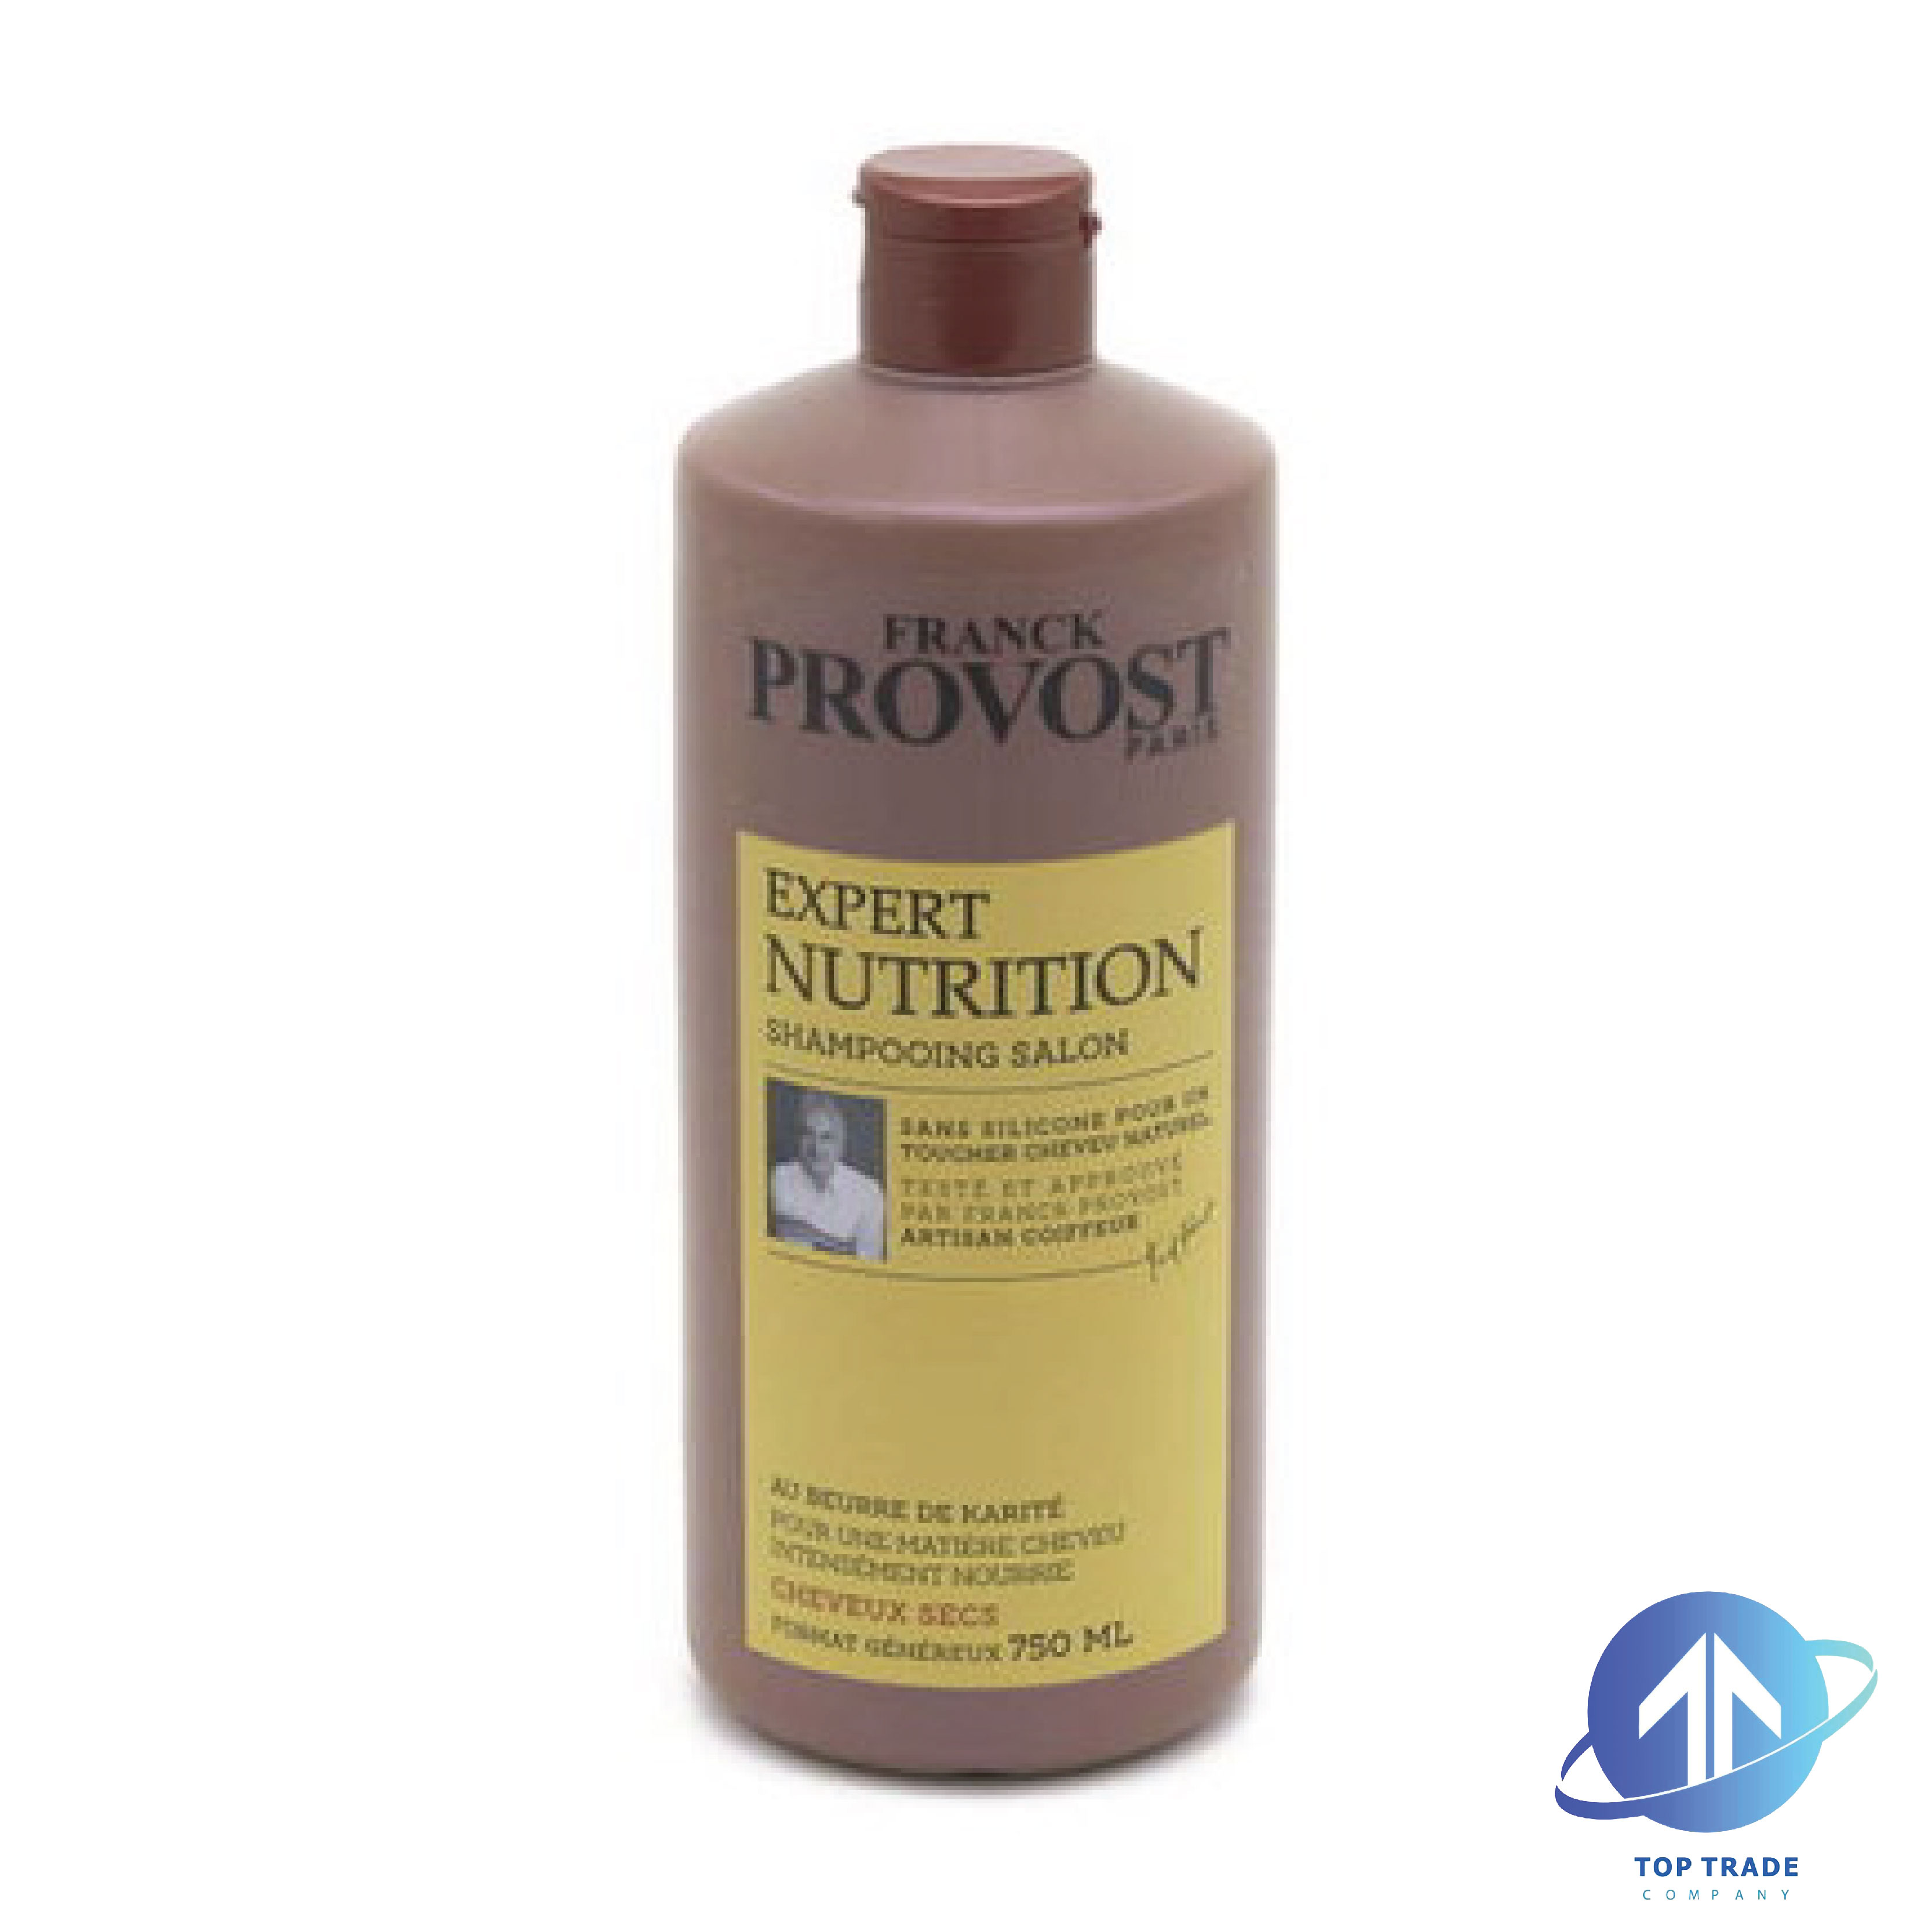 Franck Provost Expert nutrition shampoo for dry or coarse hair 750ml